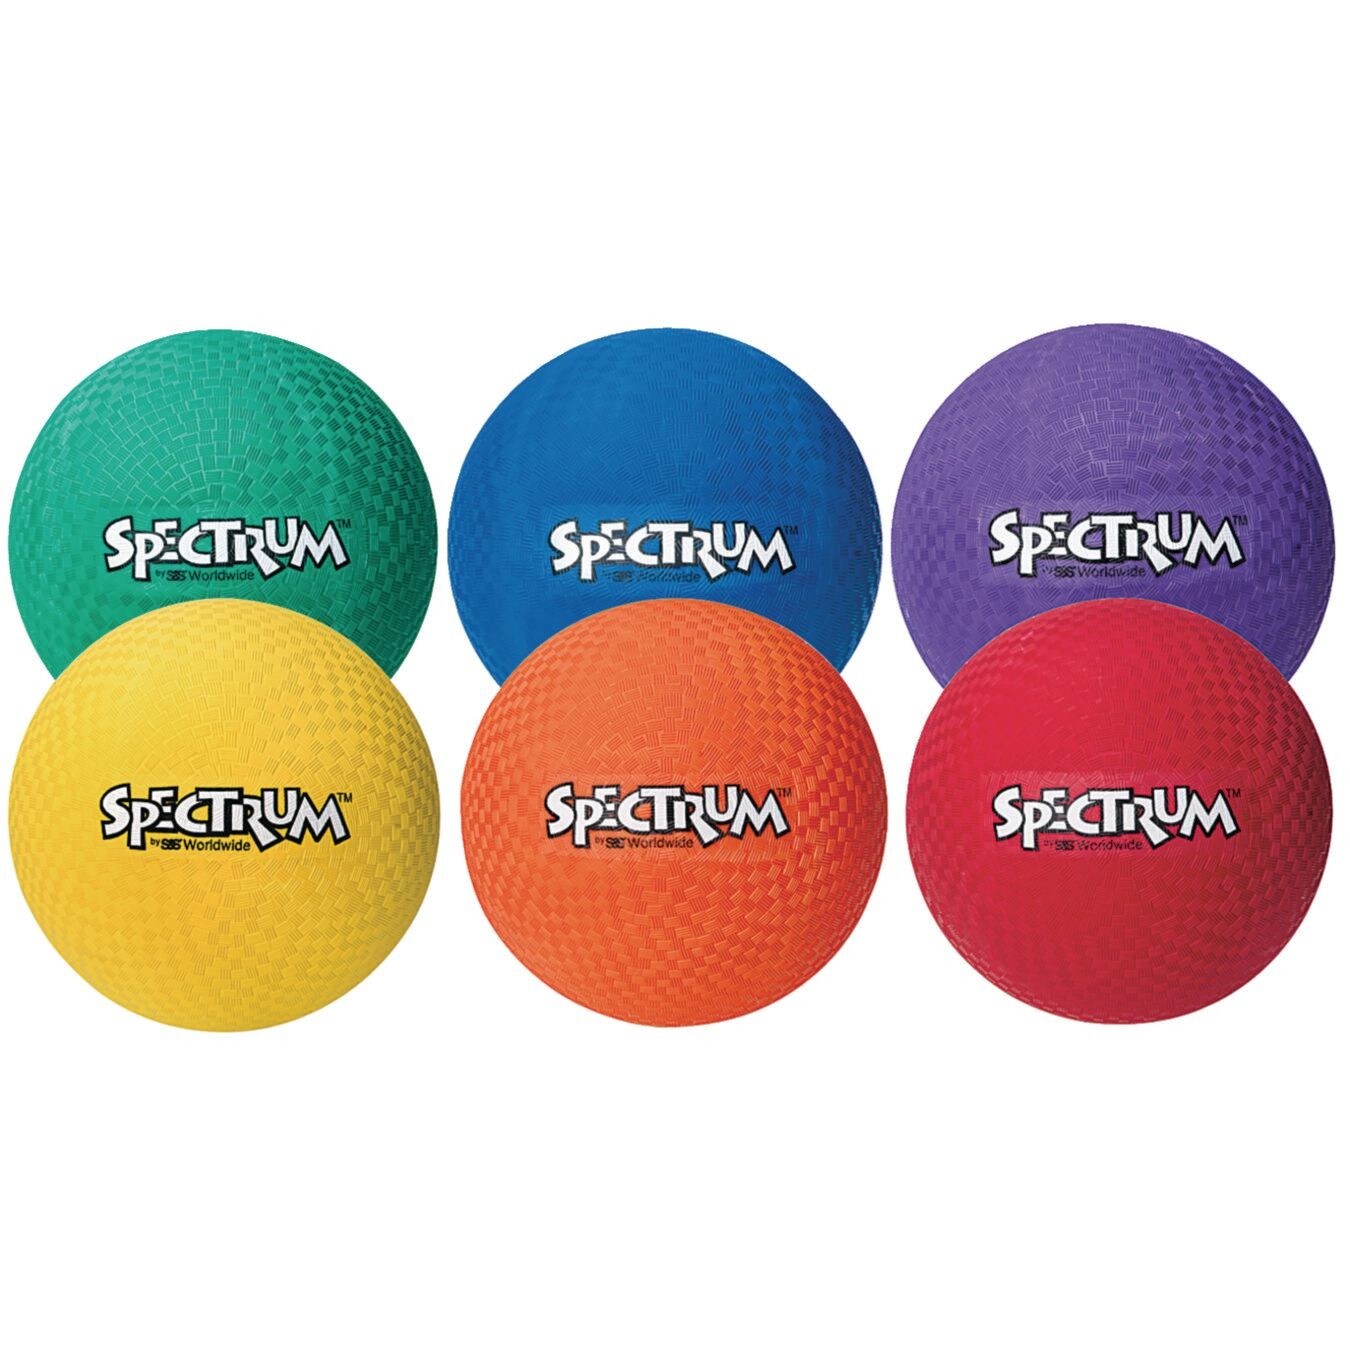 S&#x26;S Worldwide Spectrum Playground Balls, 8-1/2&#x22;.  Classic 2-Ply Playground Balls. Perfect for 4-Square, Kickball, Recess, Backyard Play or Dodgeball.  Textured Finish Balls in a Set of 6 Colors.